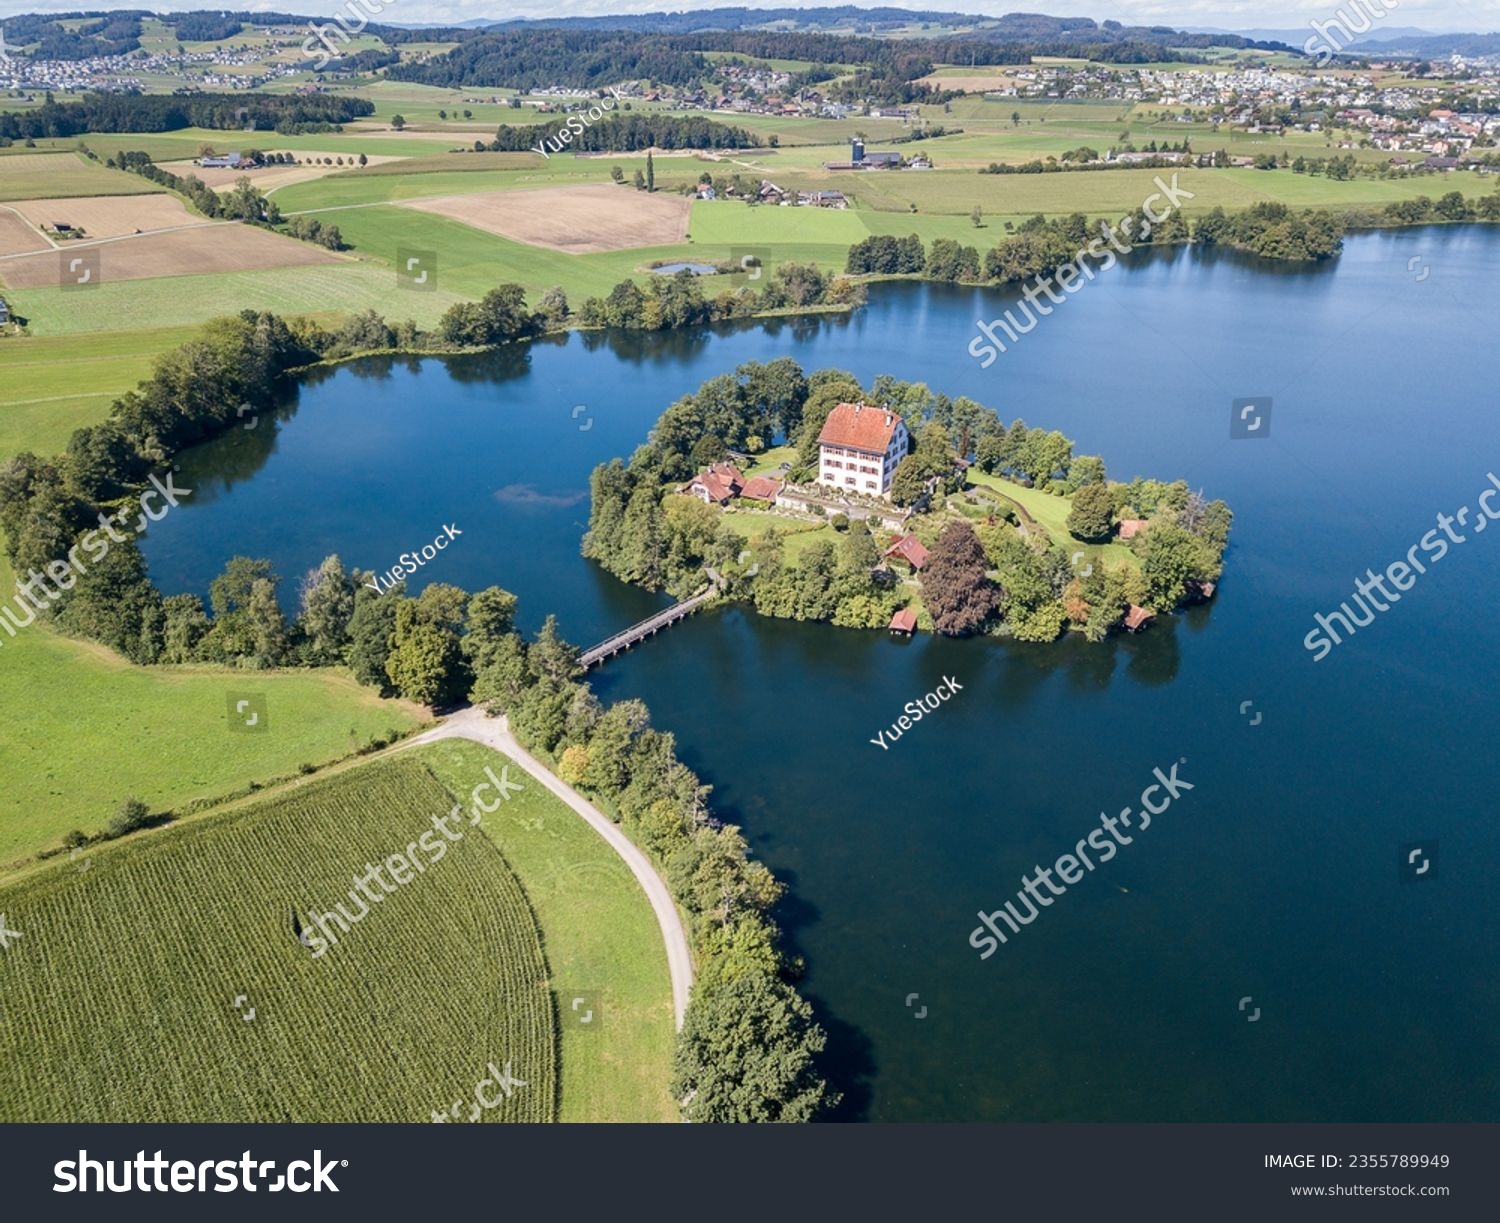 Aerial view of the Mauern Lake with an old, little castle on the small island #2355789949